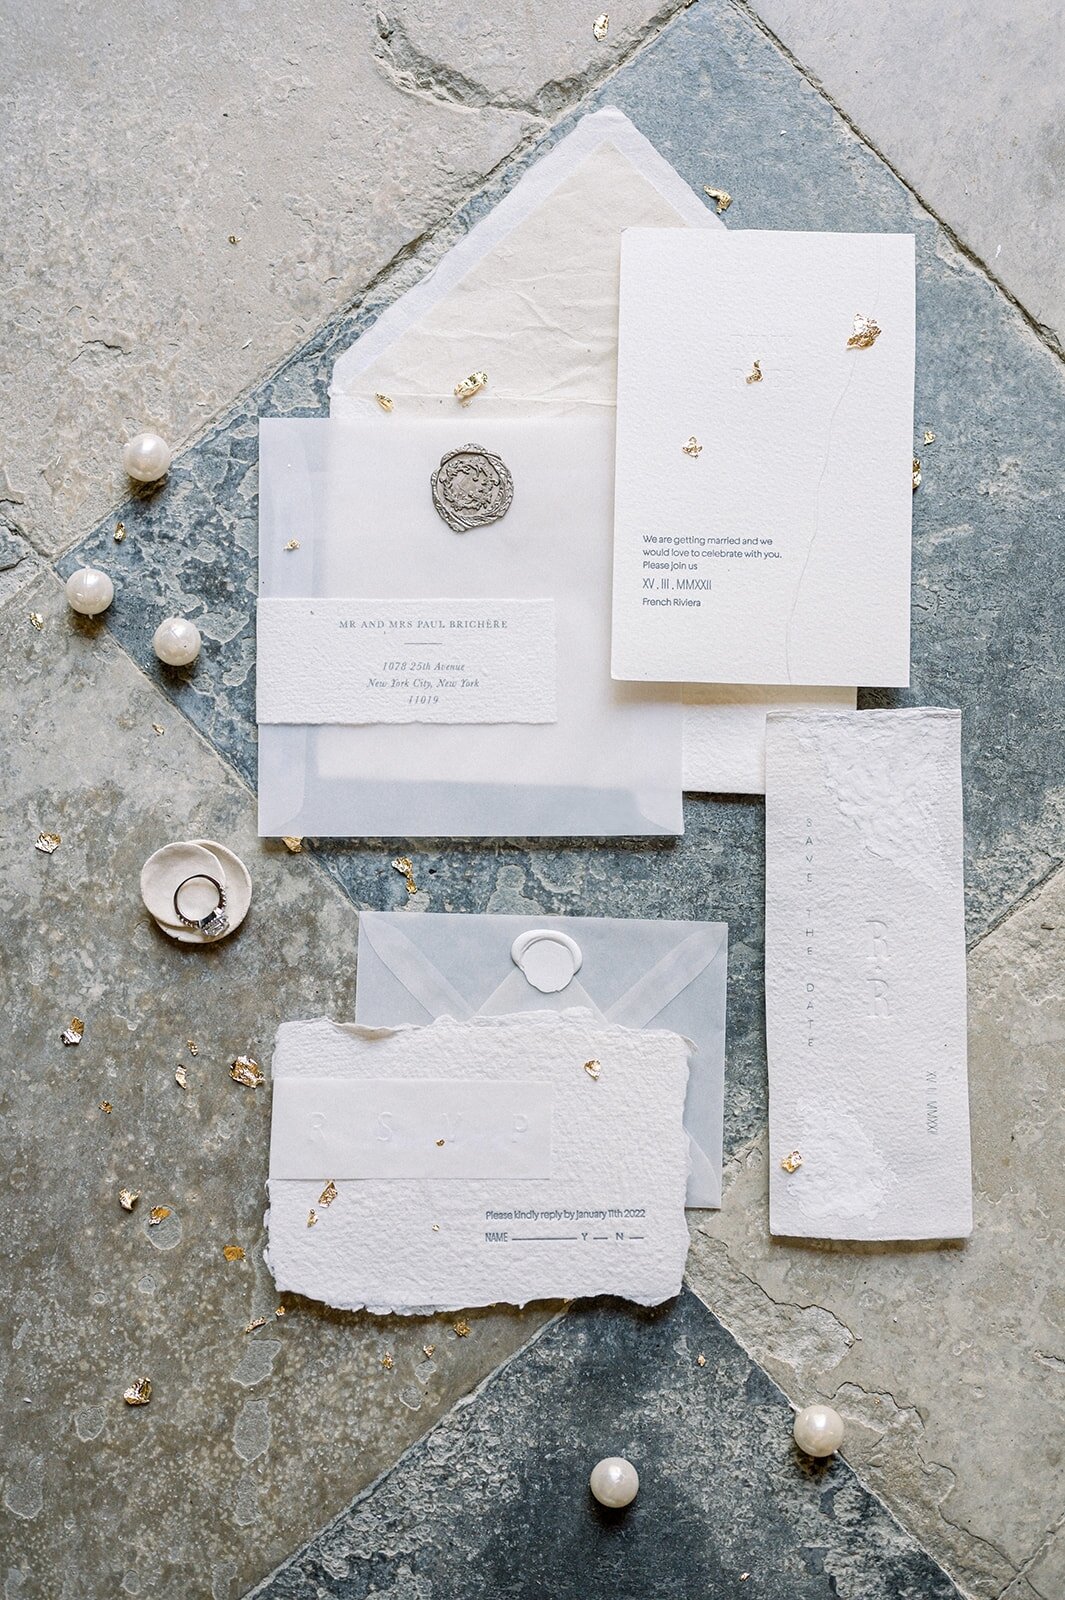 A French touch for a Provence destination wedding.​​​​​​​​ If the chosen destination for the wedding has cultural features or distinctives elements, consider including them into the stationery. This adds a delightful touch in honouring the location a